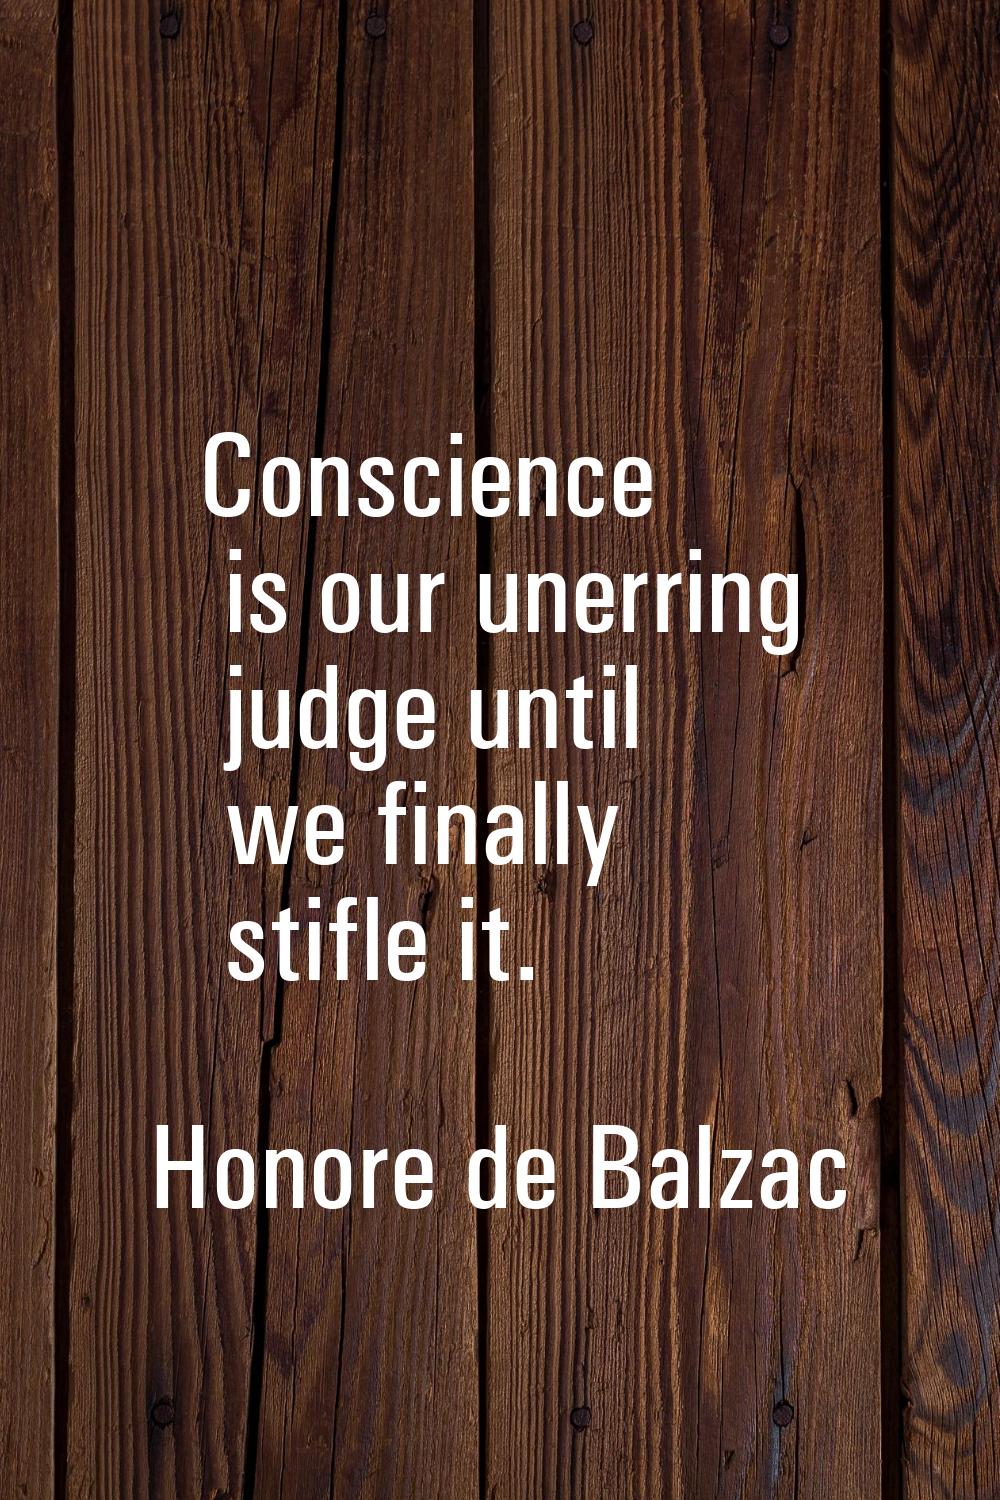 Conscience is our unerring judge until we finally stifle it.